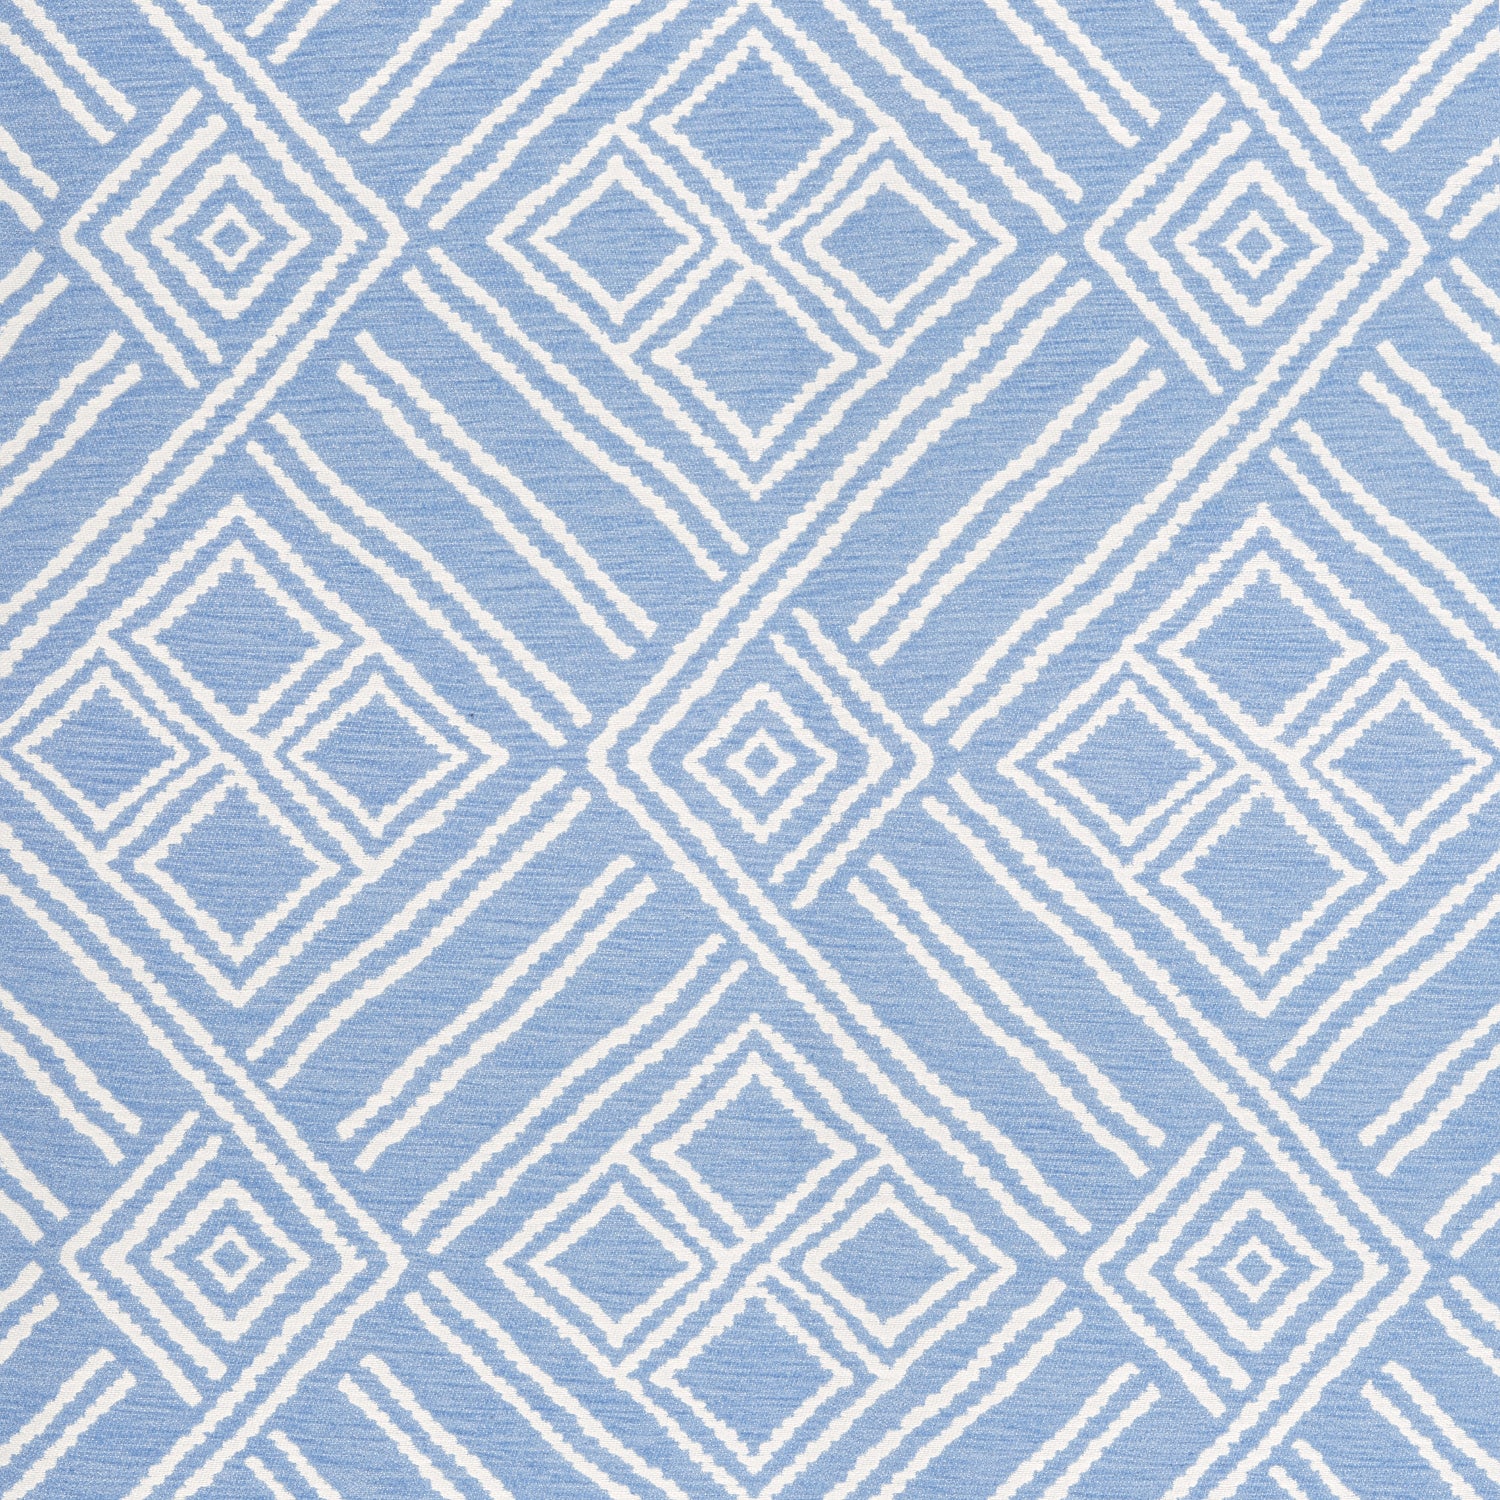 Terraza fabric in sky color - pattern number W8610 - by Thibaut in the Villa collection